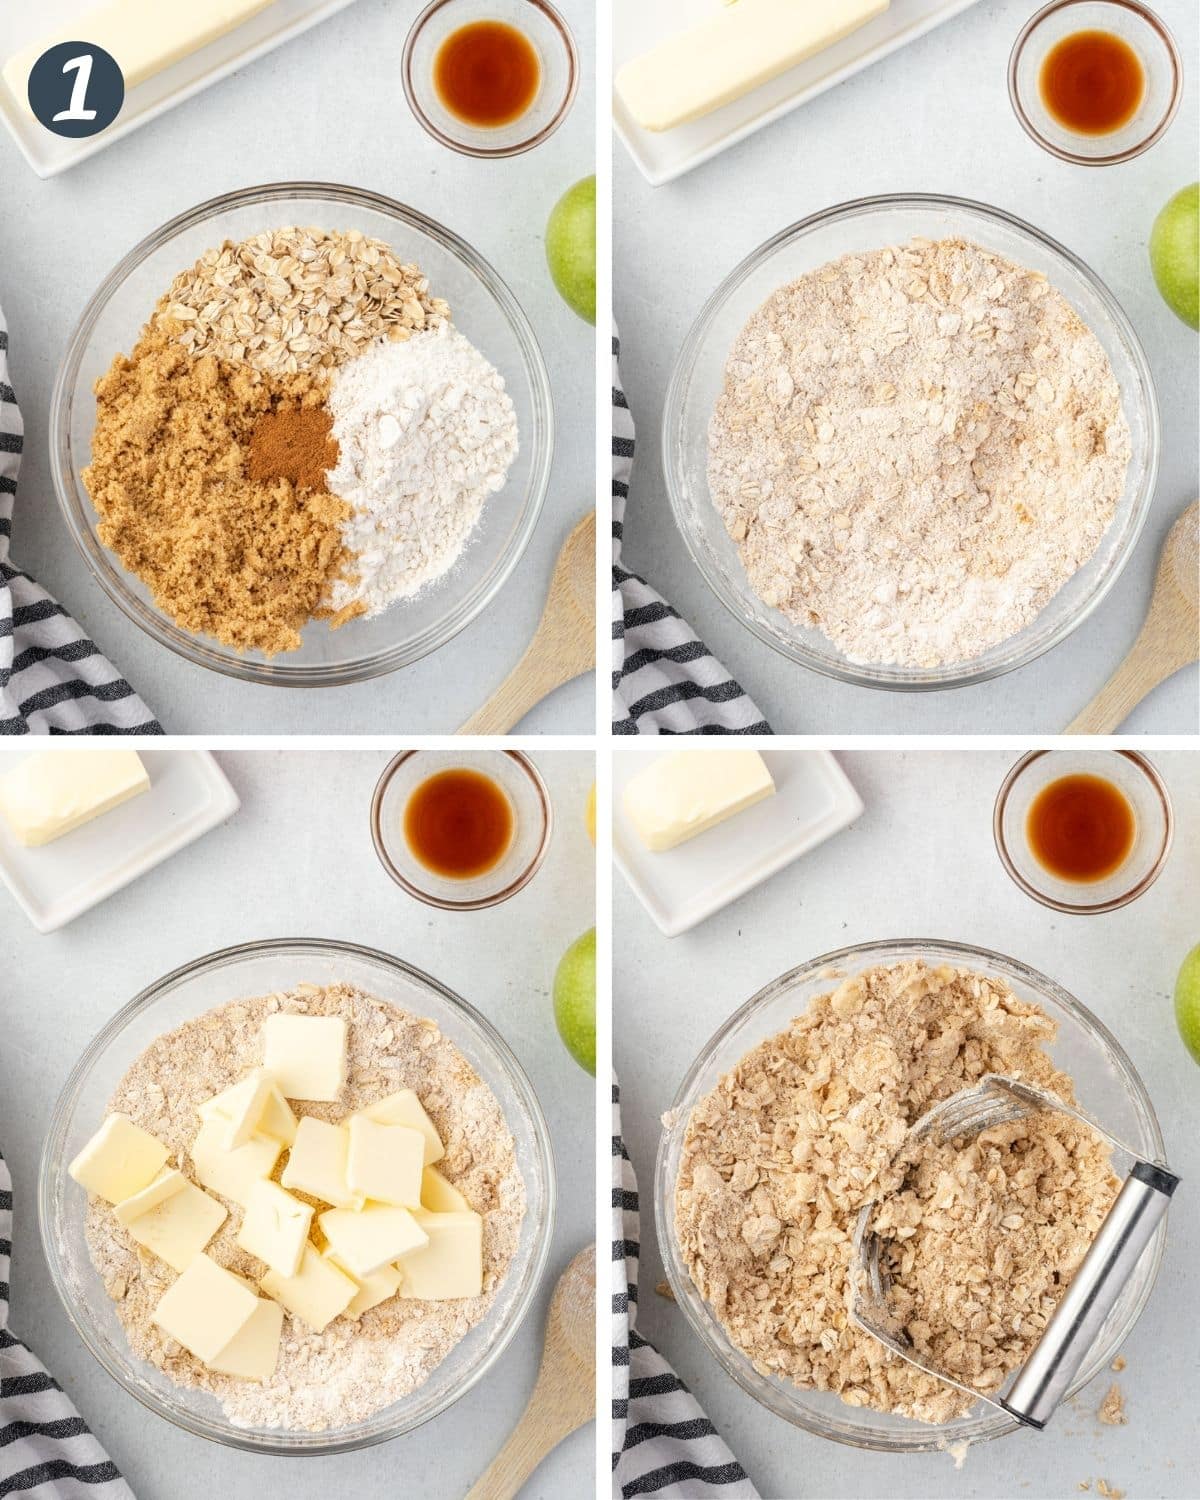 4 steps to making streusel topping.